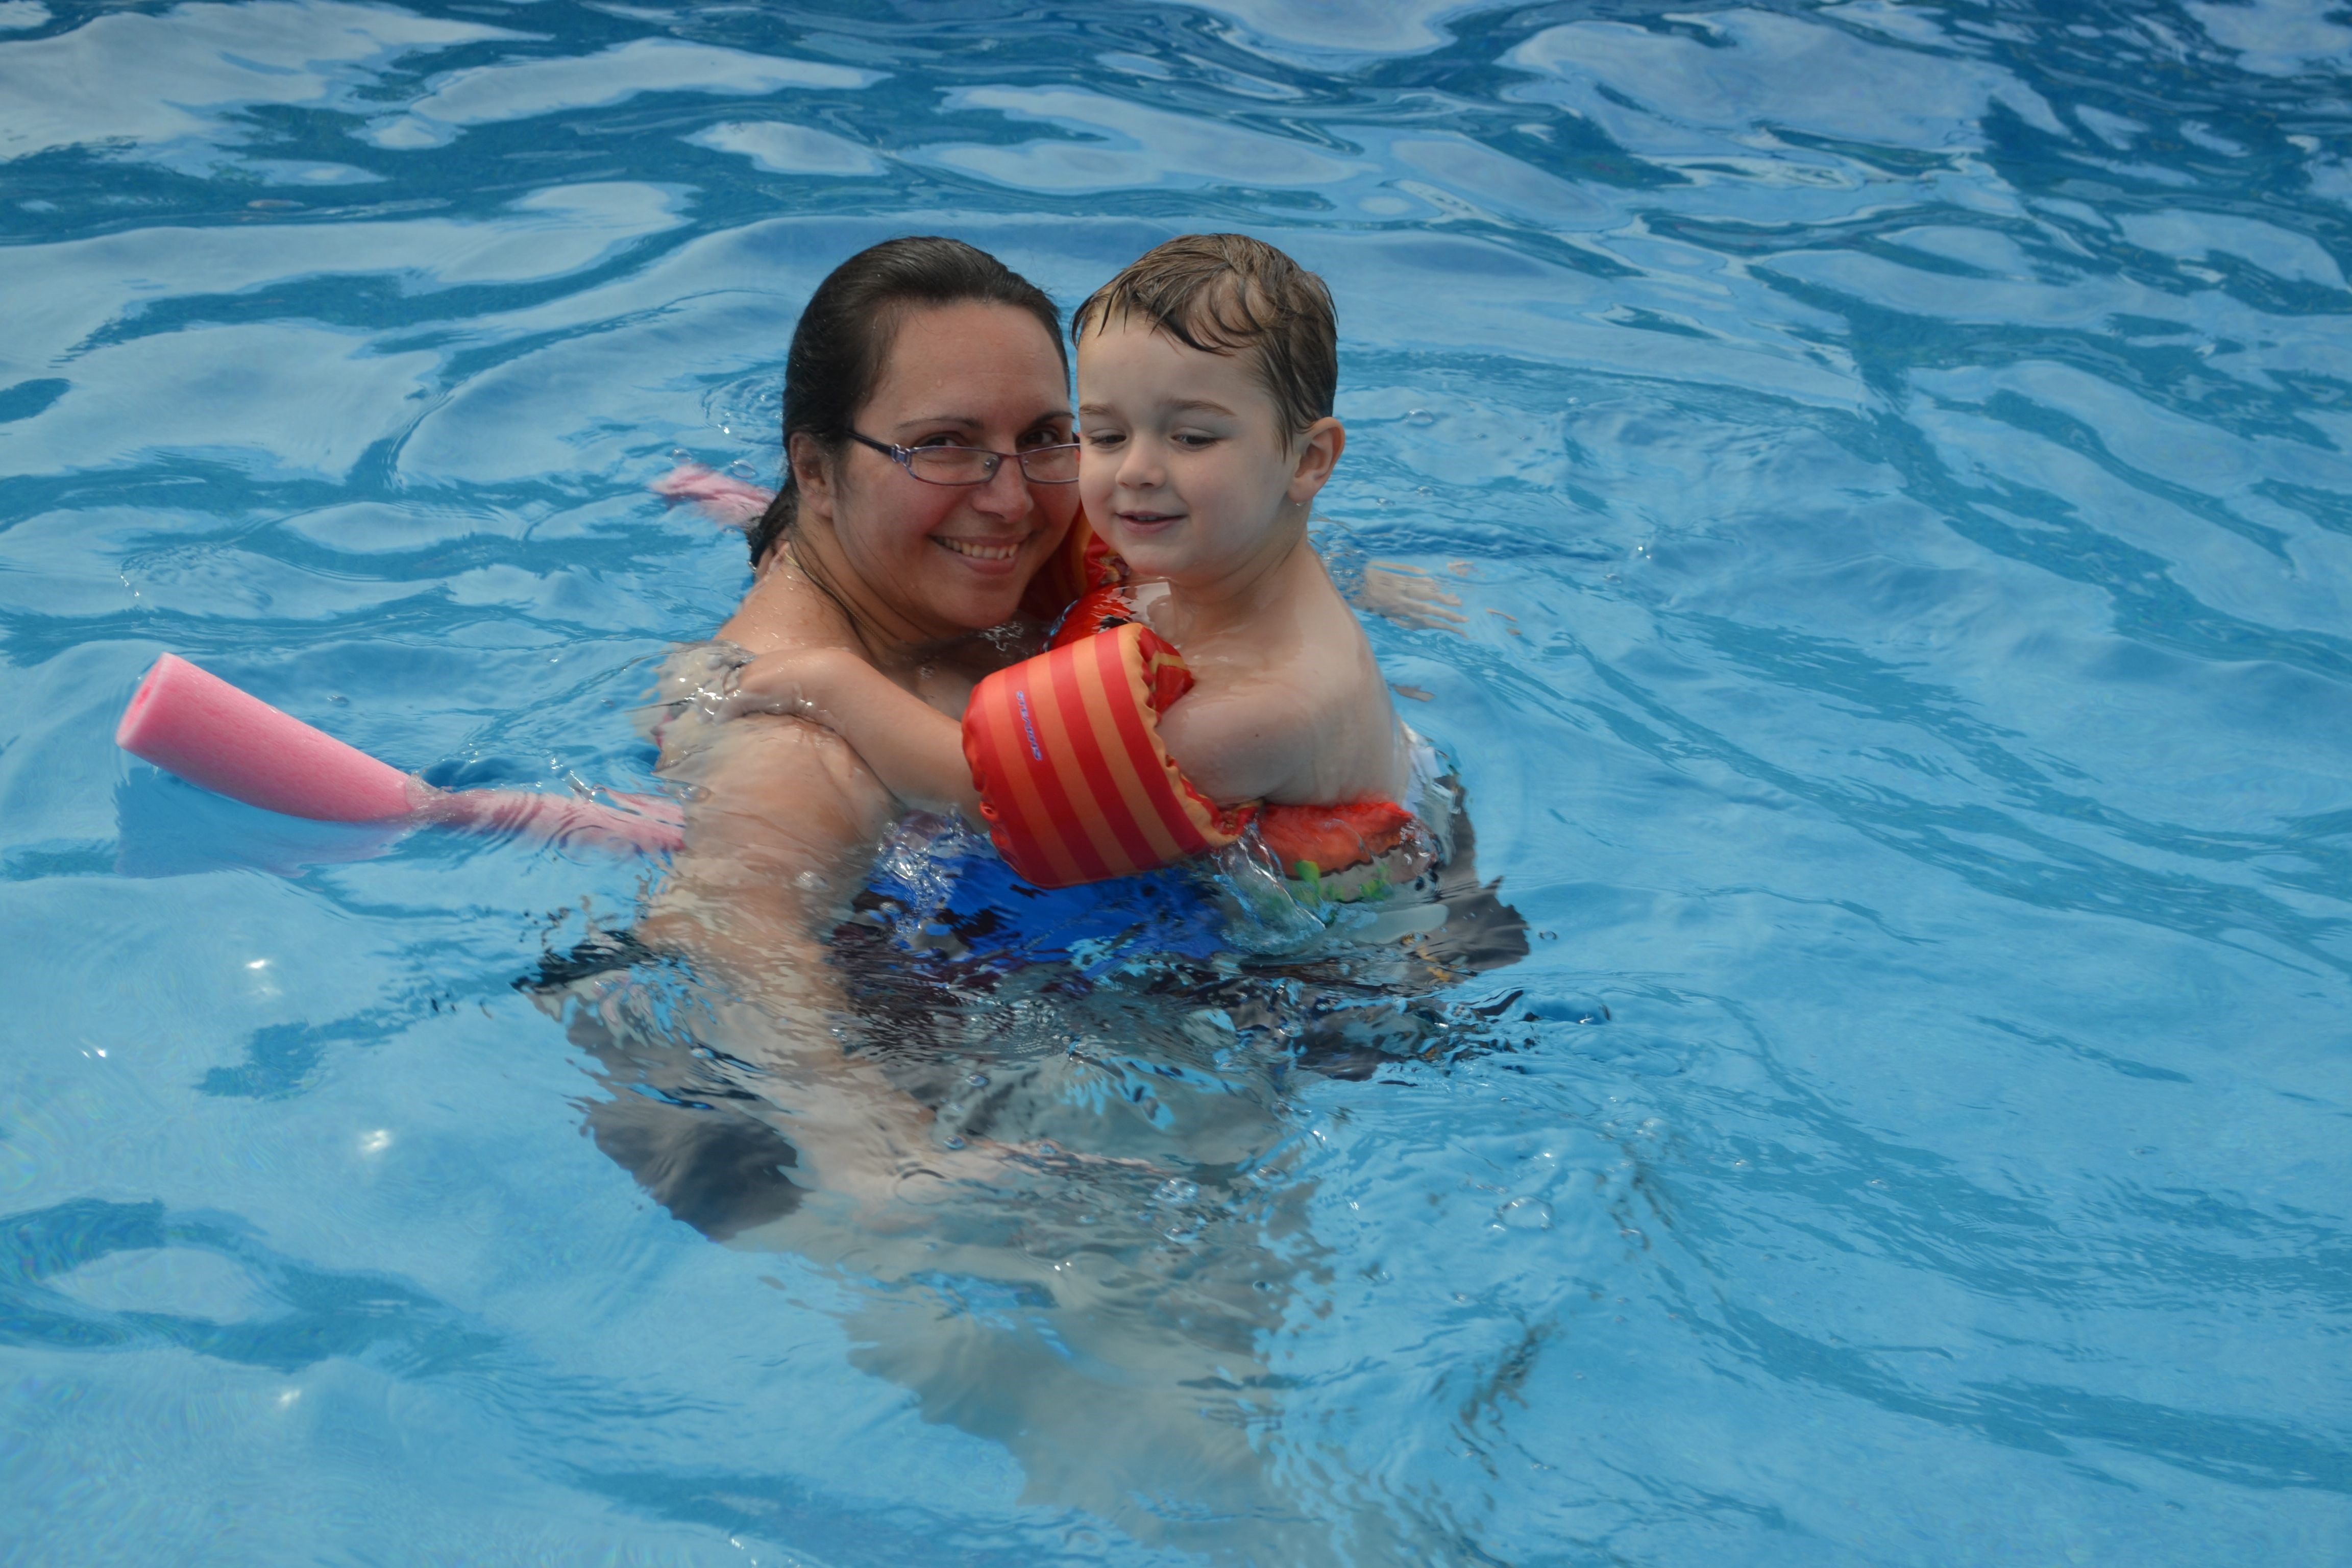 Marjorie and her son Thomas smiling together in a swimming pool.